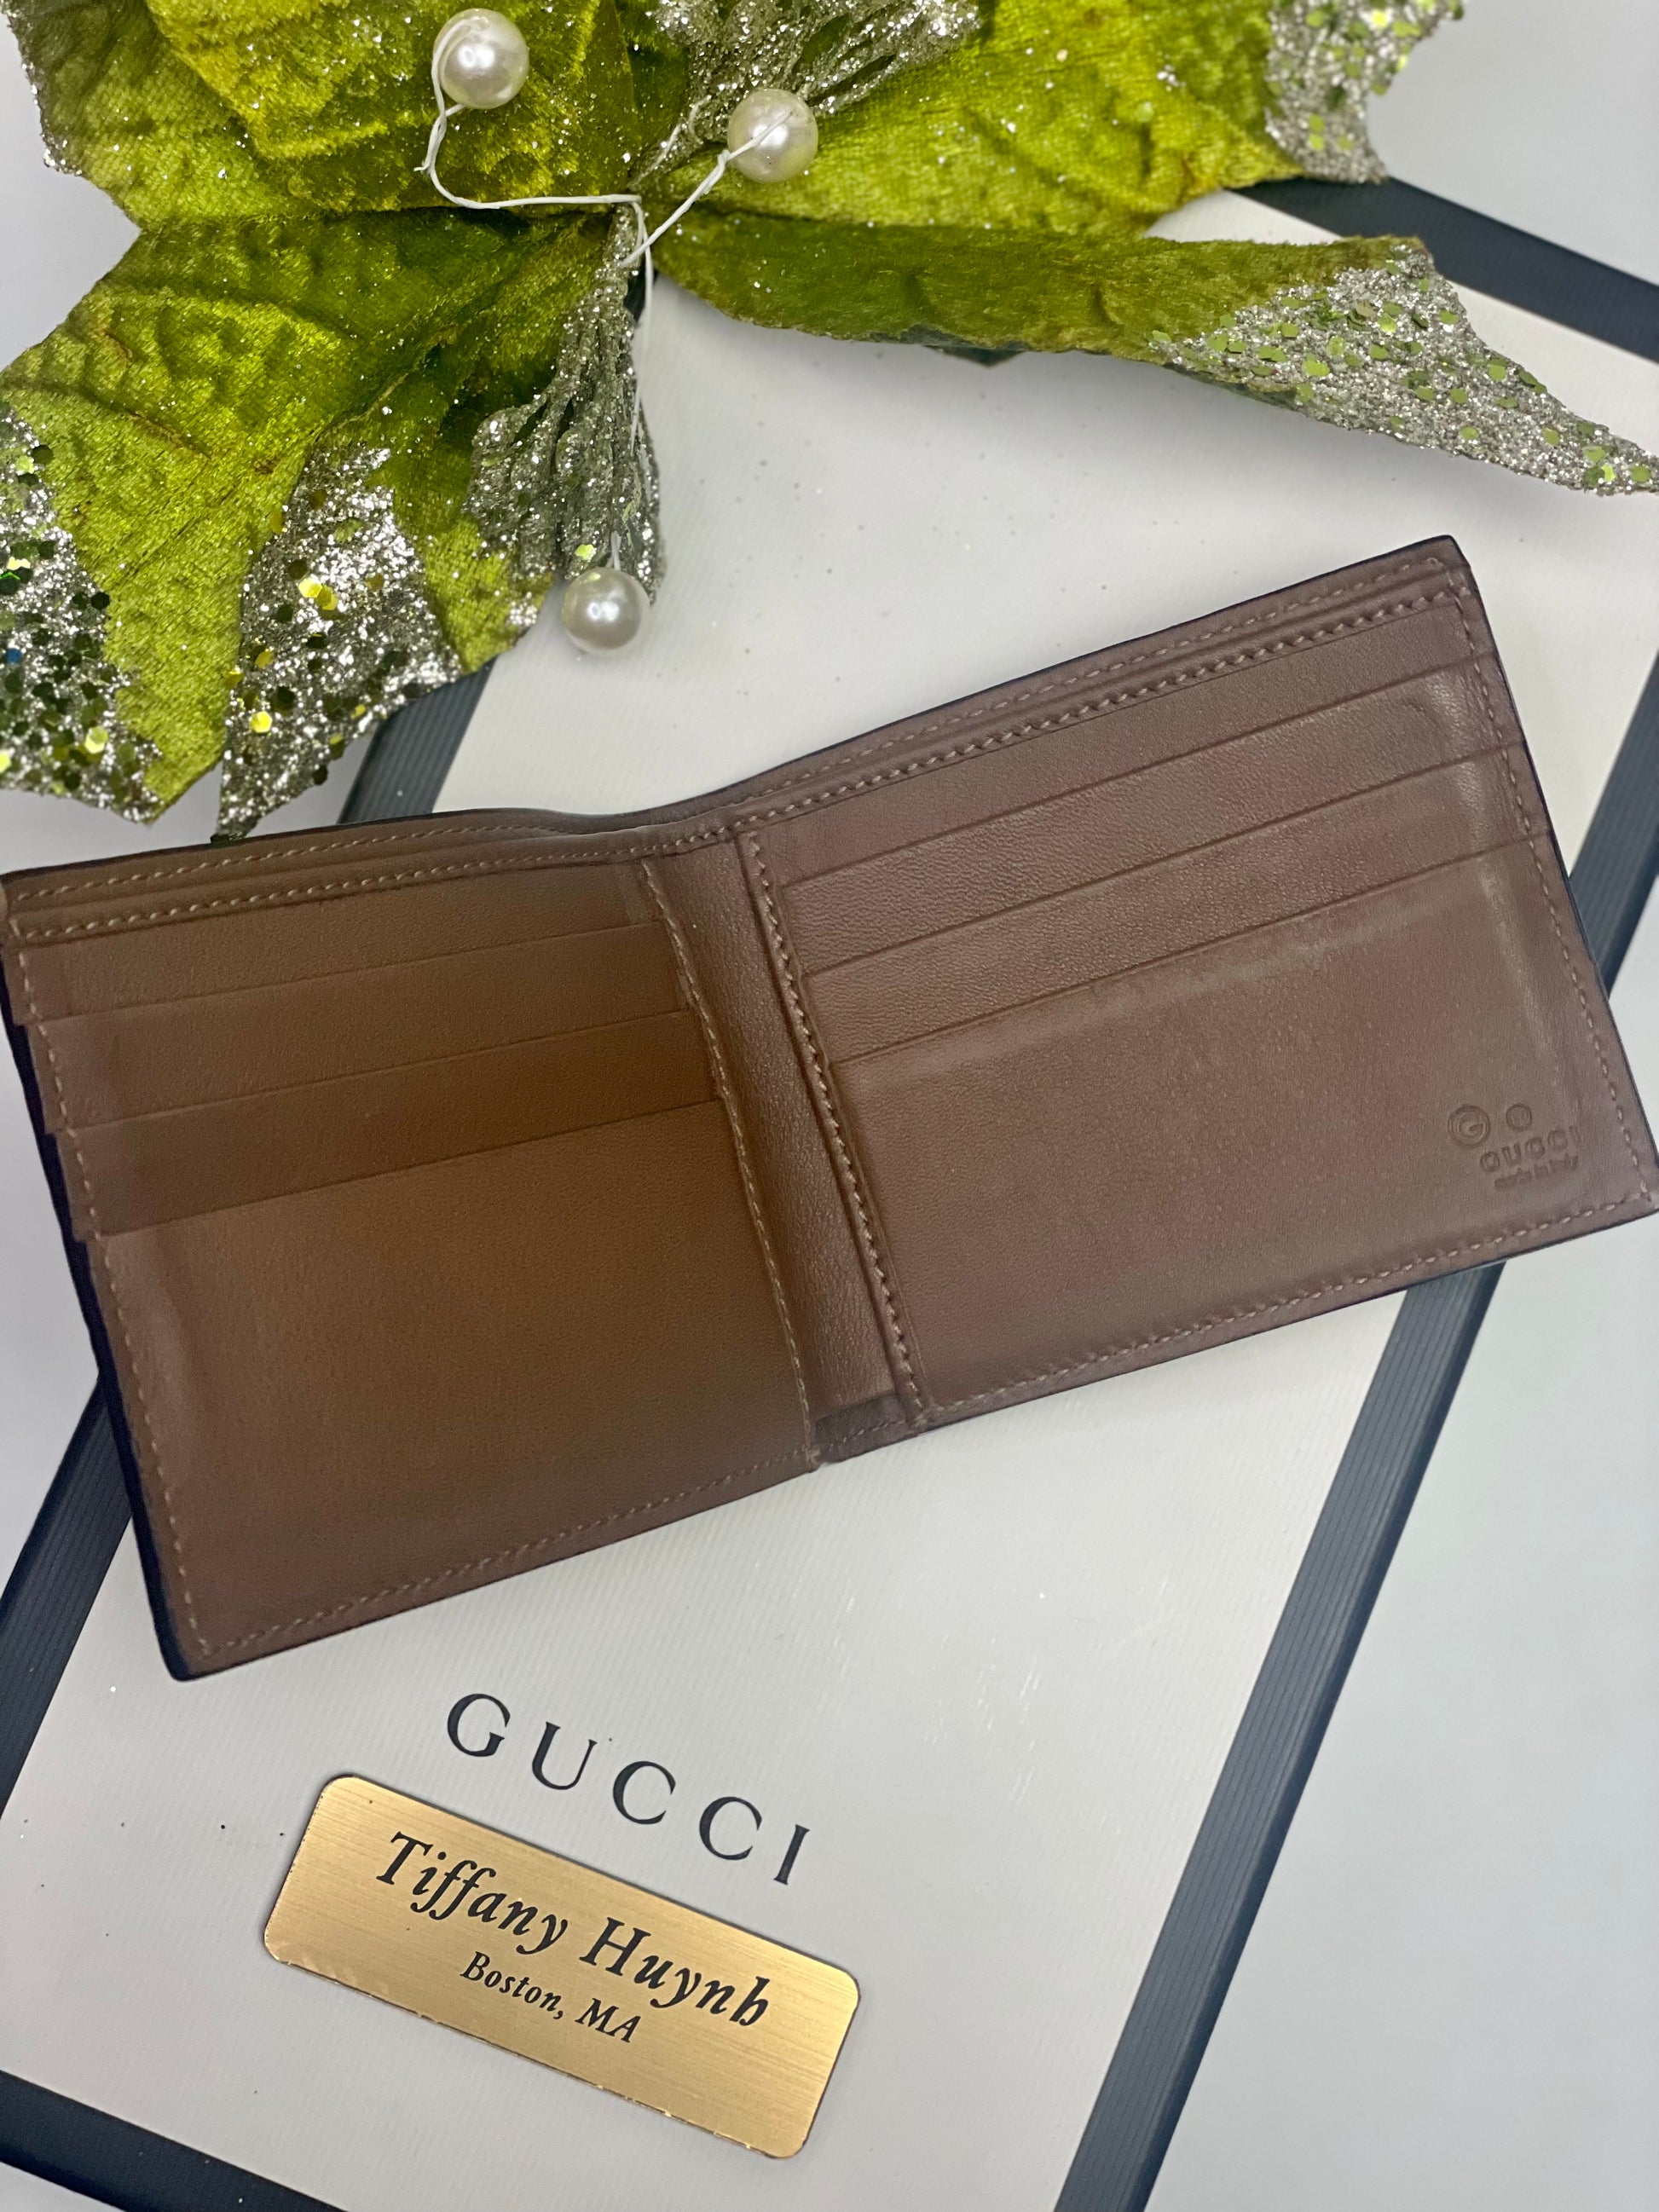 Gucci Men's Brown Leather Microguccissima Bifold Wallet